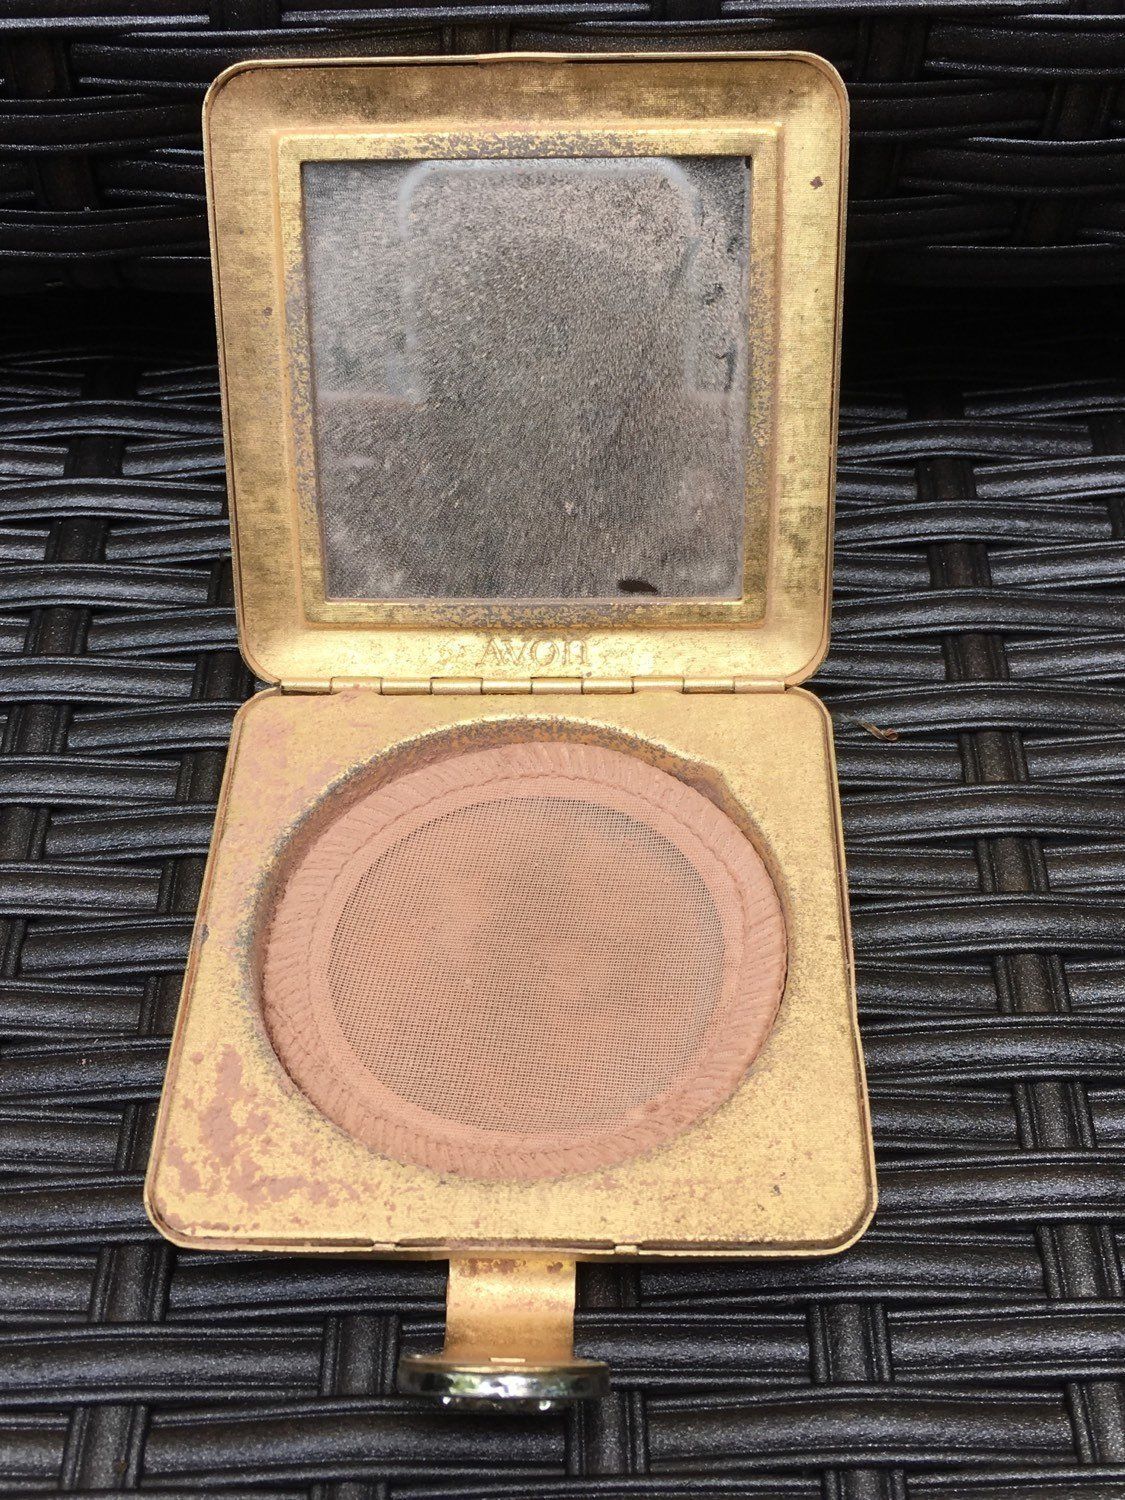 Vintage Compact by Avon. Gold Tone Compact with Floral Rhinestone Clasp and Interior Mirror. Fashion Accessory. Gift for Her. Purse Mirror